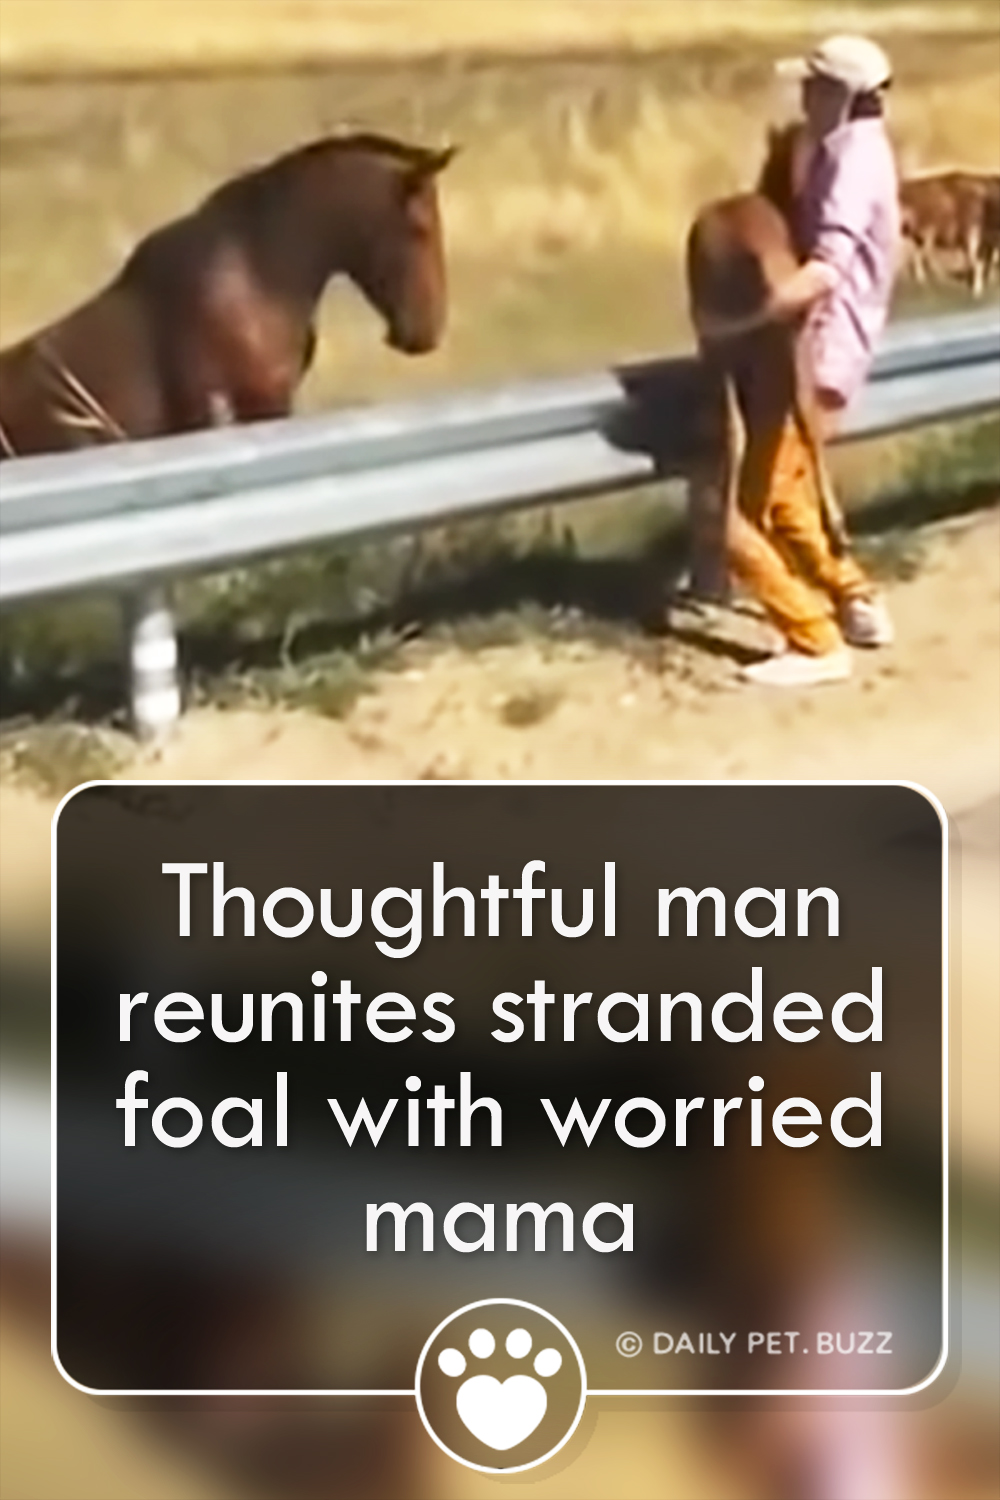 Thoughtful man reunites stranded foal with worried mama